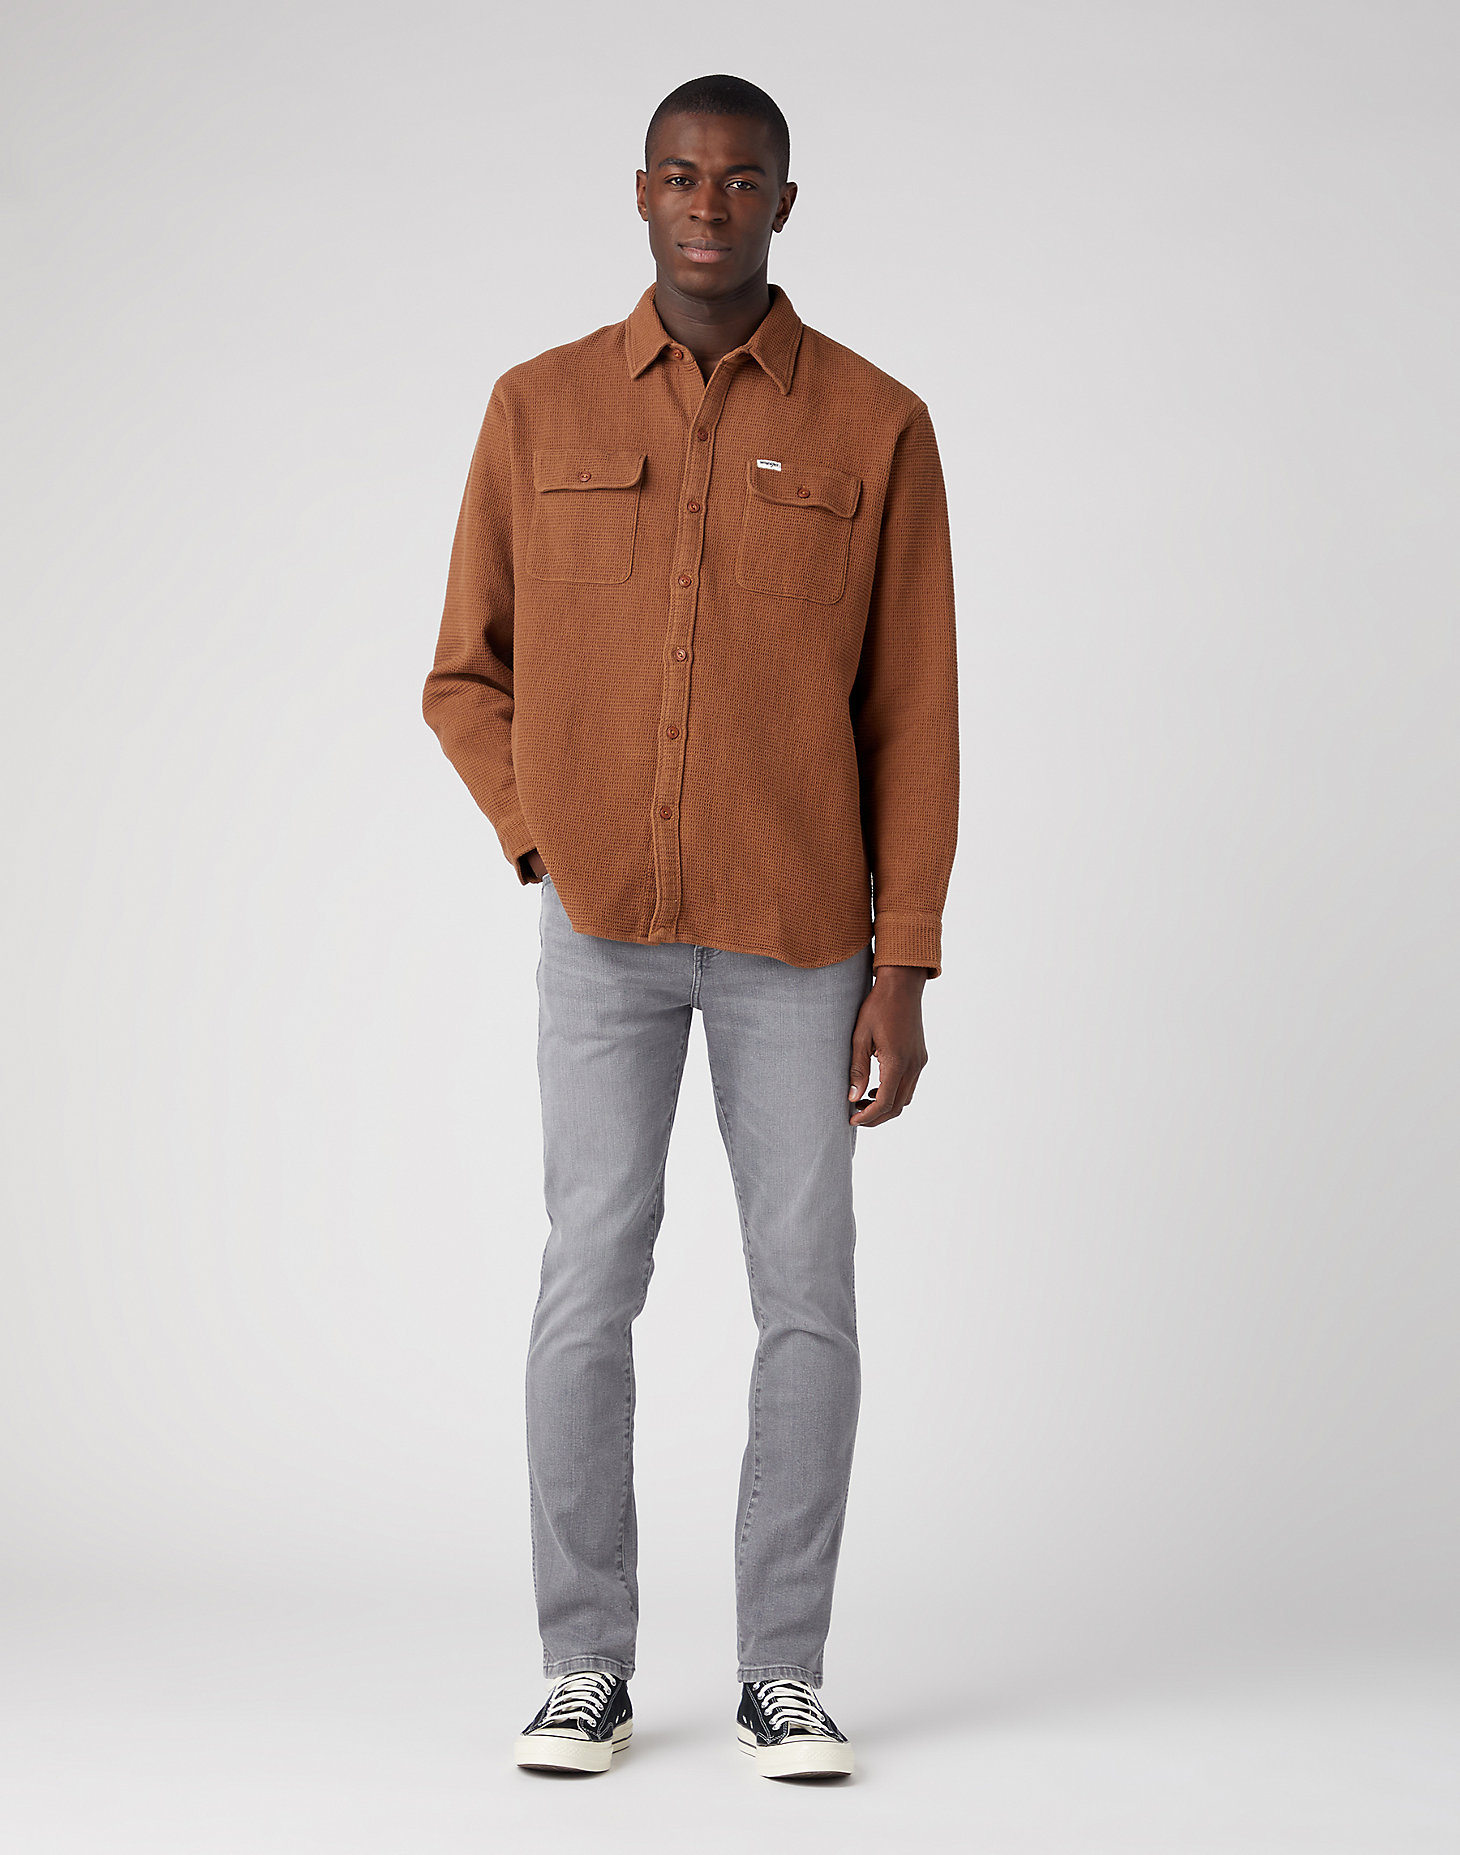 Overshirt in Toffee alternative view 1